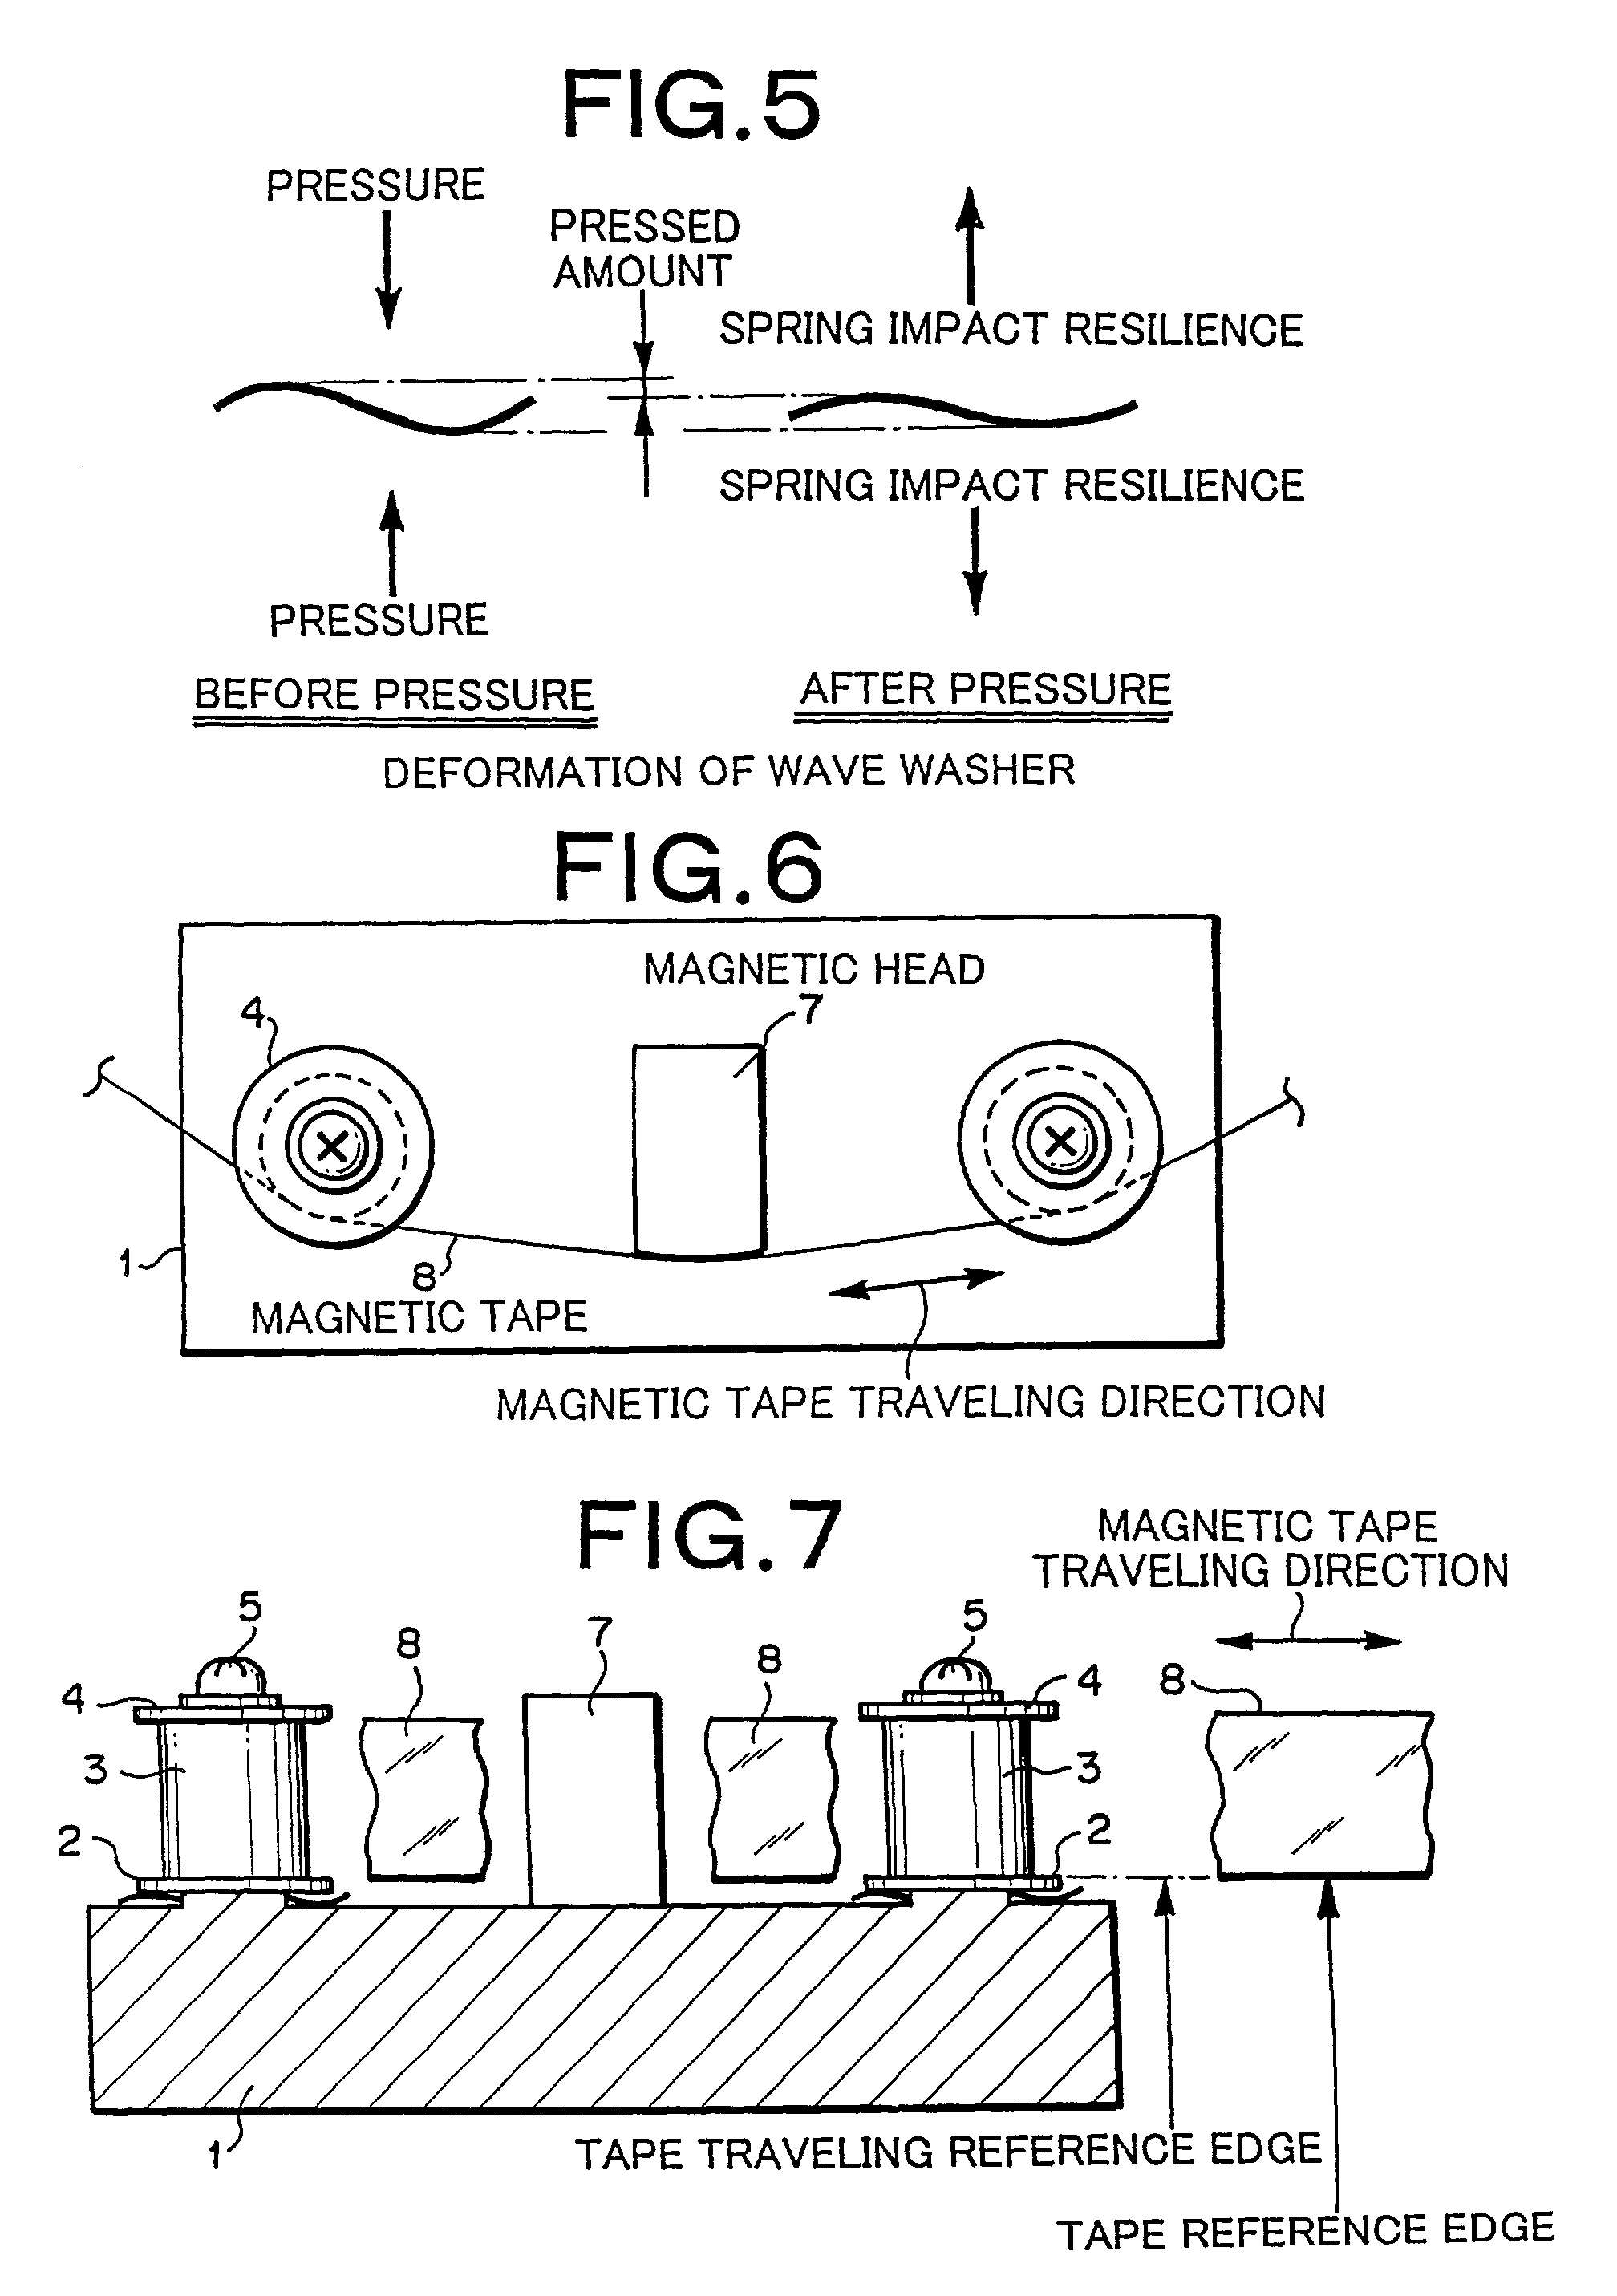 Mechanism for restricting lateral position of tape traveling in longitudinal direction